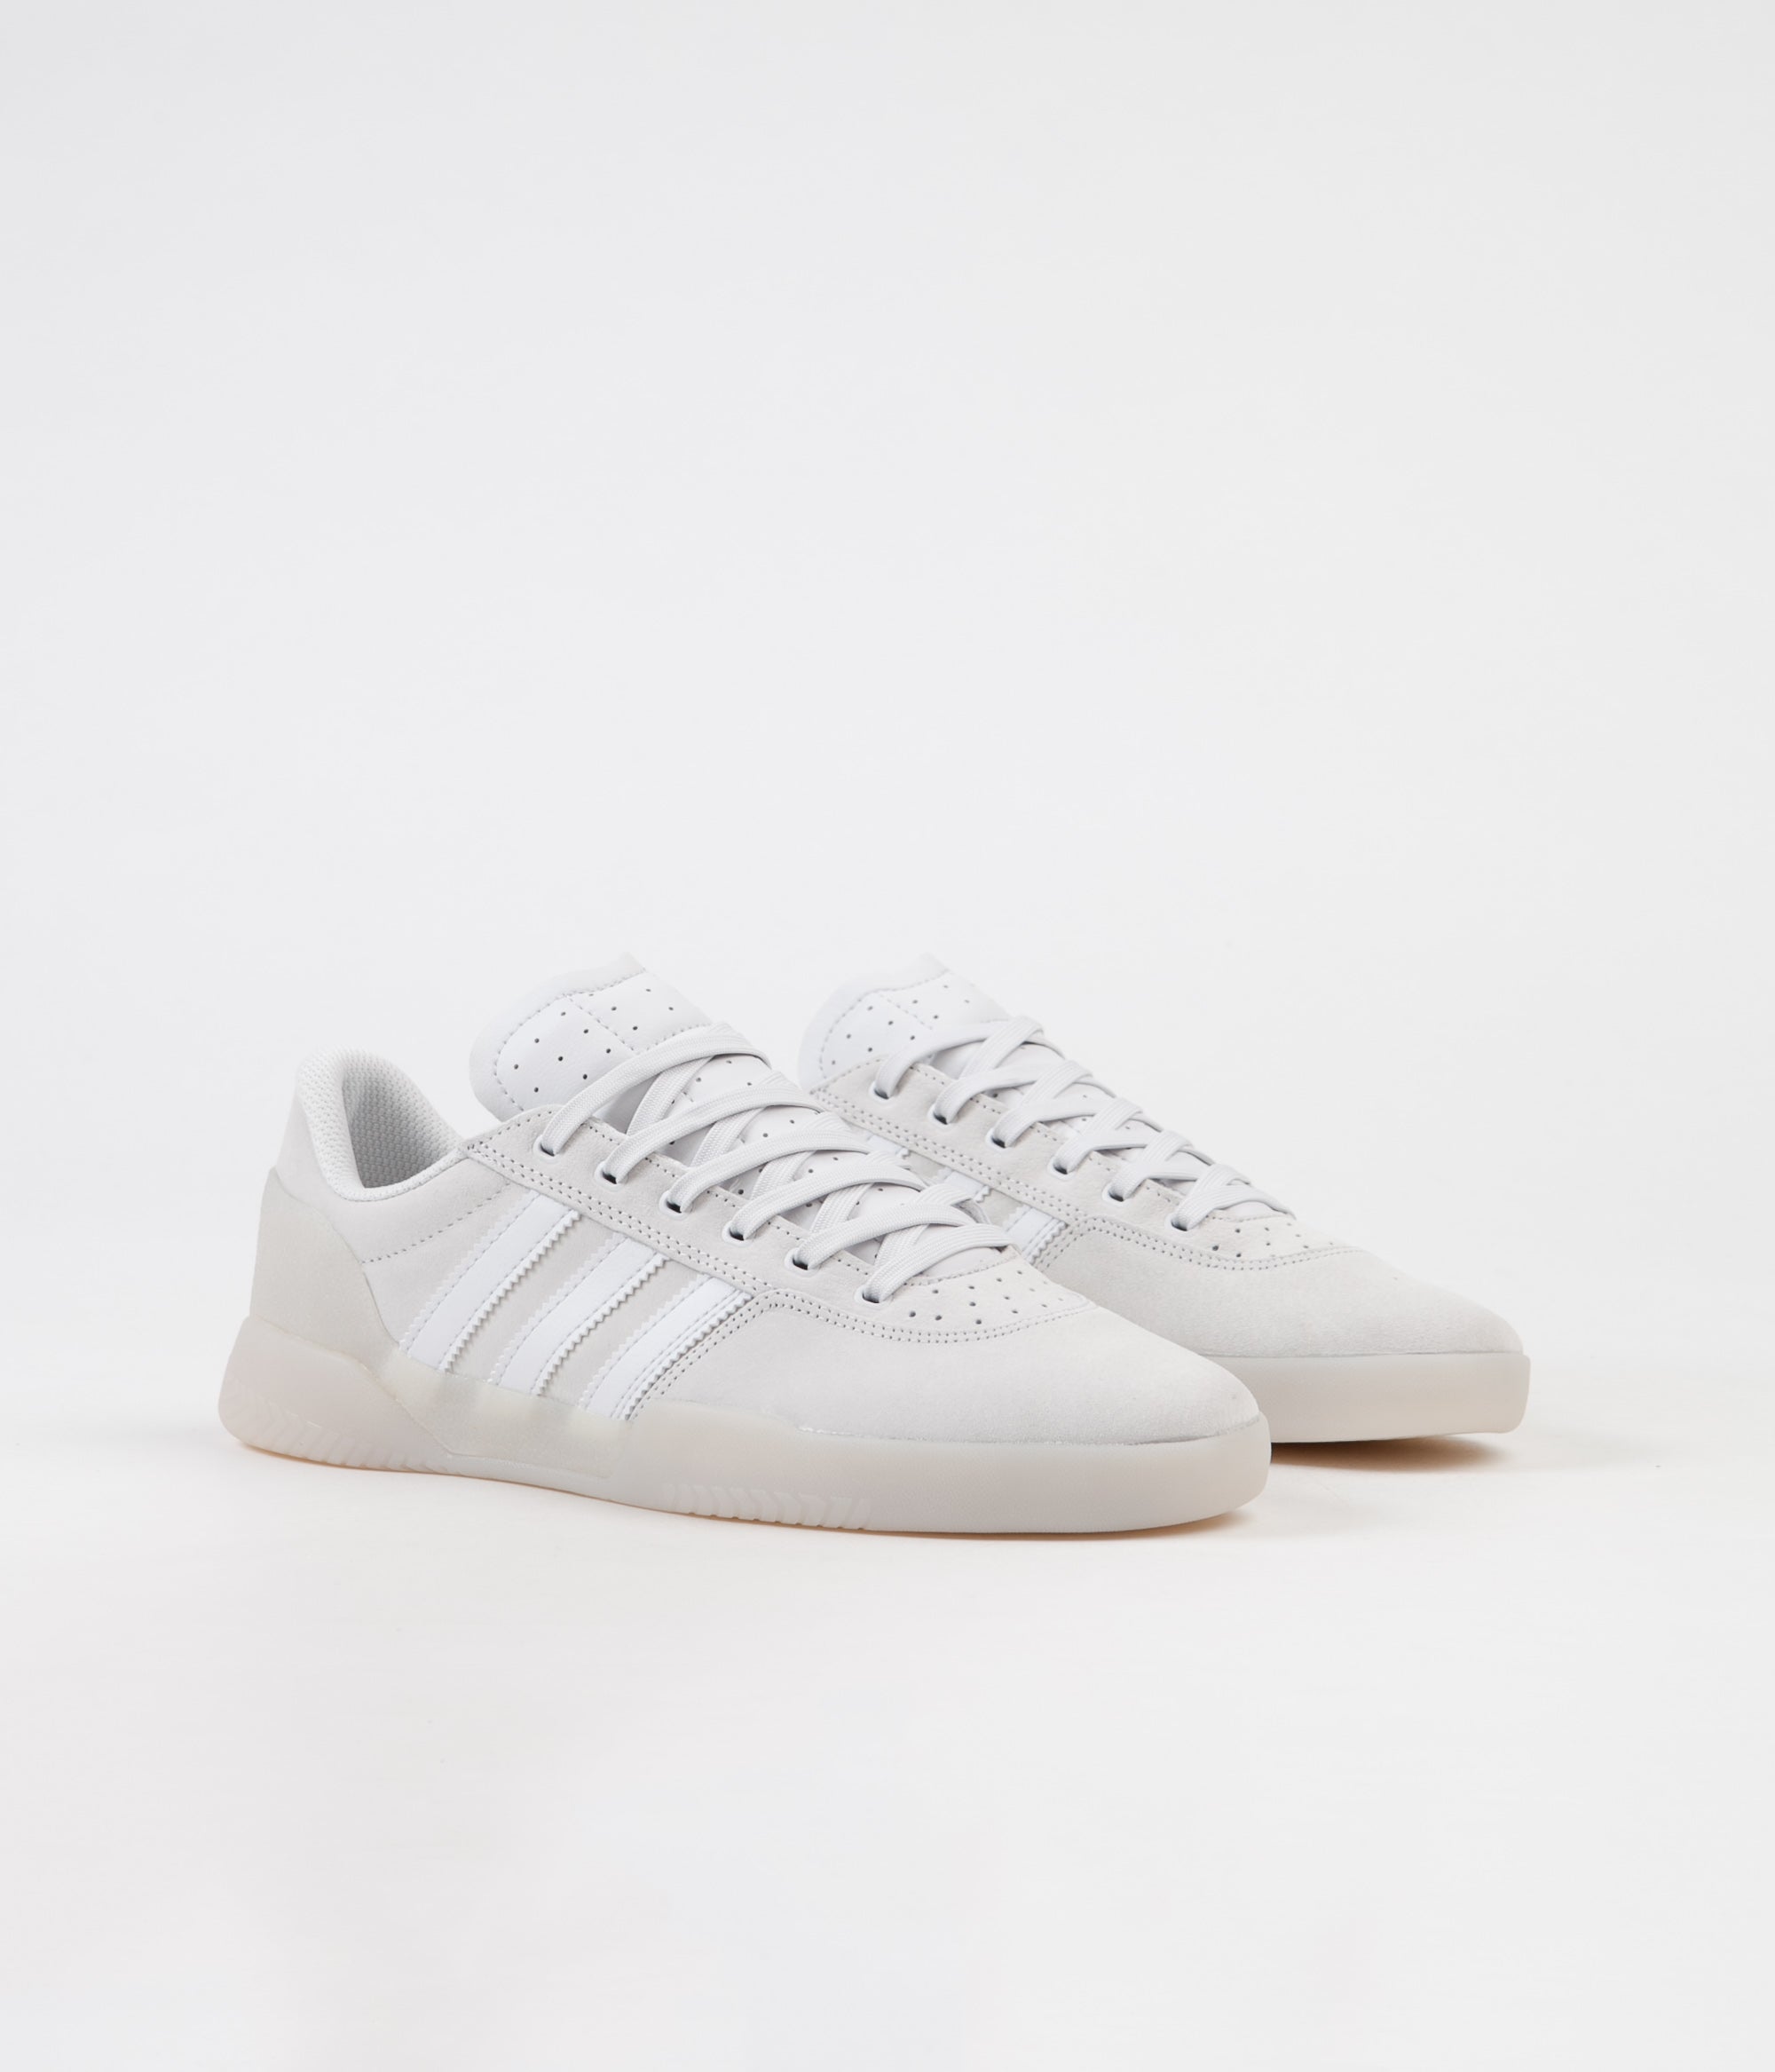 Adidas City Cup Shoes - Crystal White / Crystal White / Crystal White ...